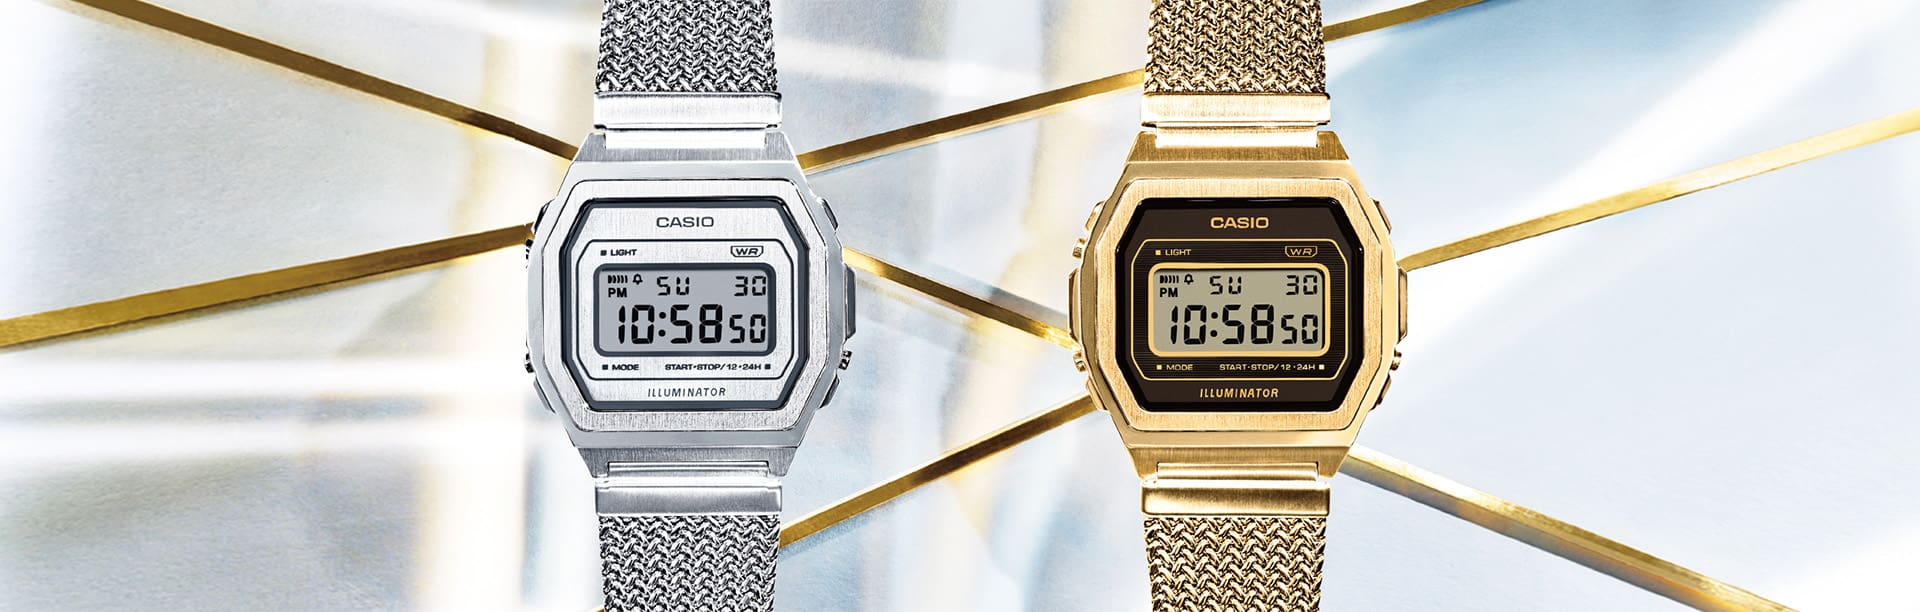 Gold and Silver digital Casio Vintage watches with metallic mesh bands